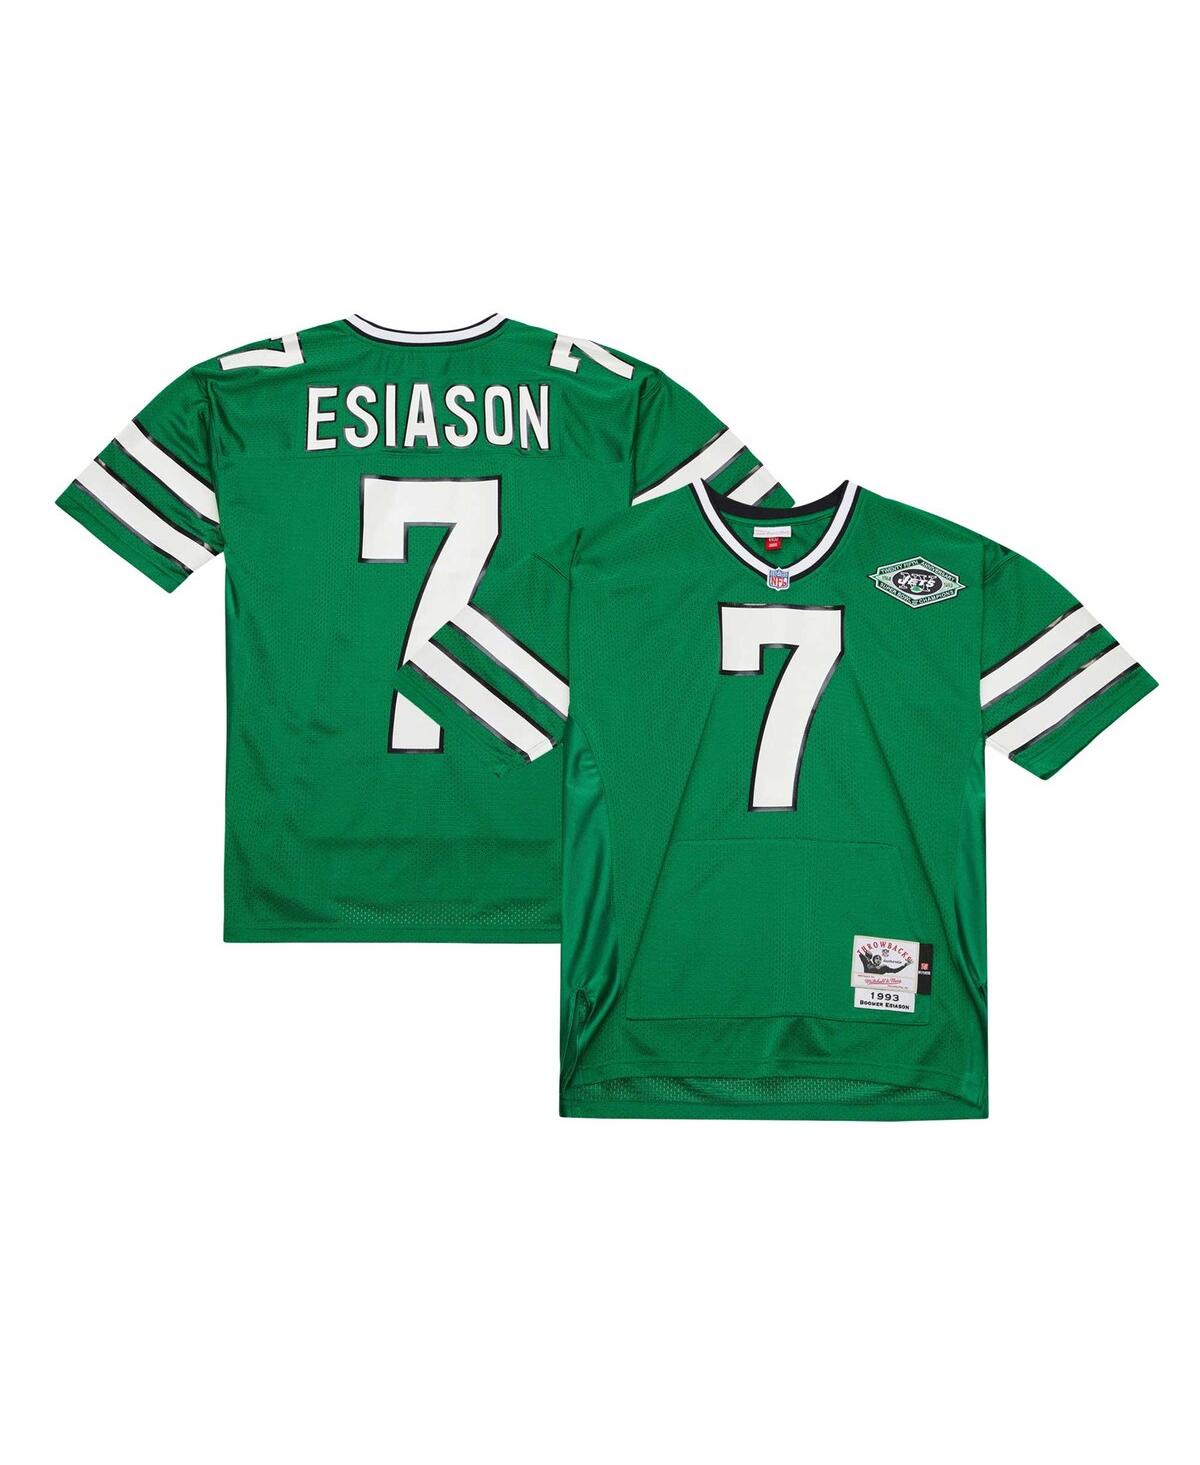 Men's Mitchell & Ness Boomer Esiason Kelly Green New York Jets 1993 Authentic Retired Player Pocket Jersey - Kelly Green